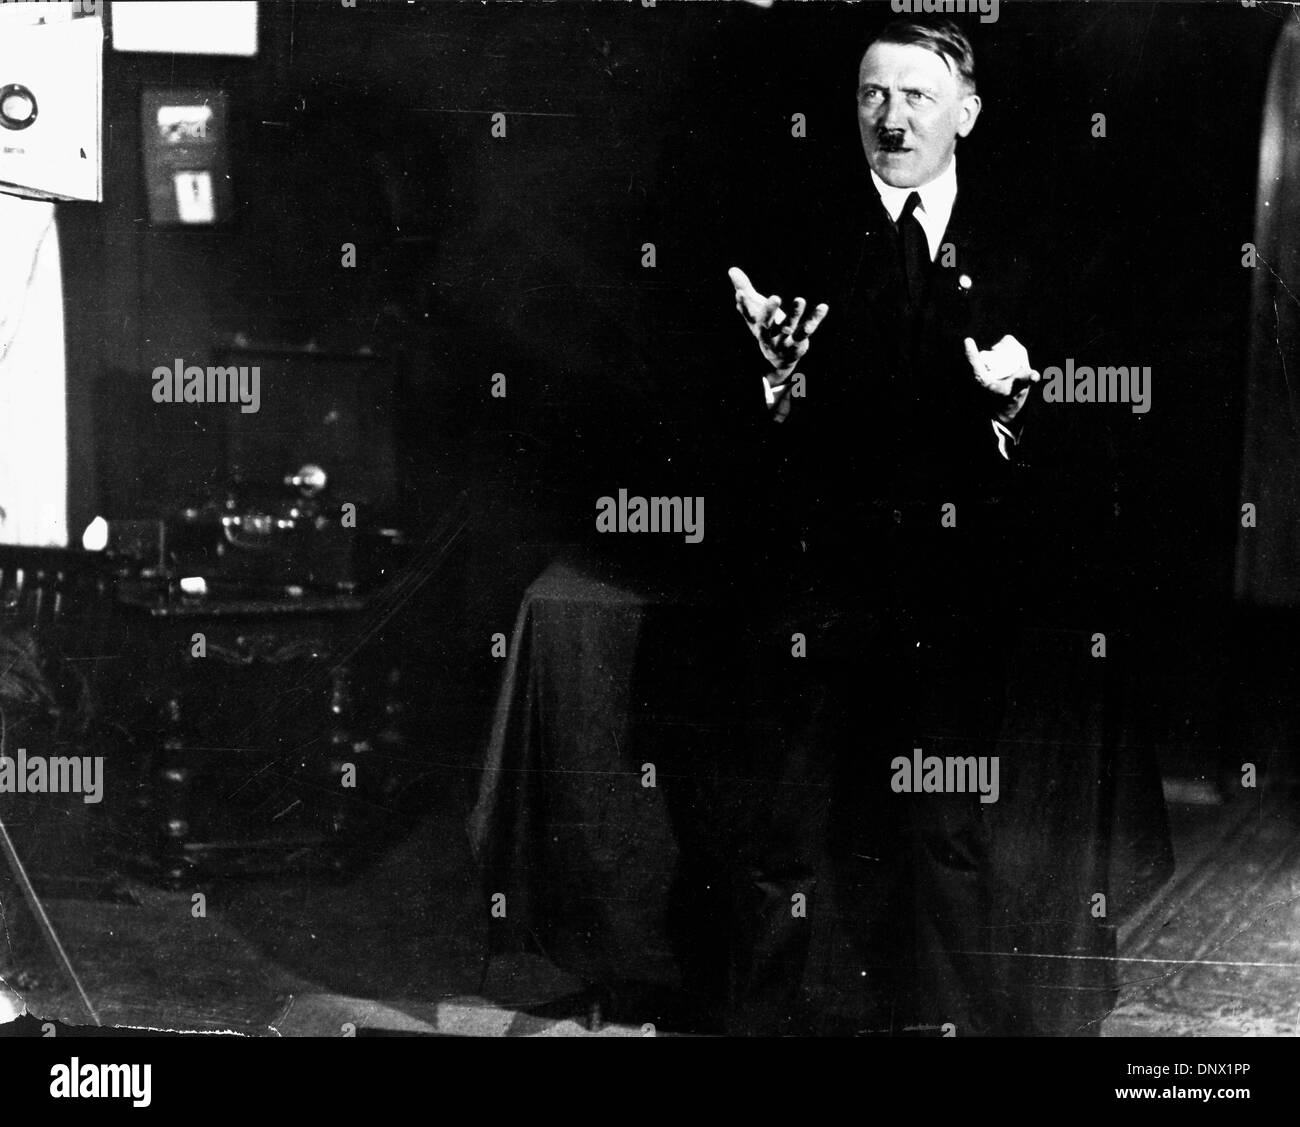 Feb. 18, 1932 - Berlin, Germany - ADOLF HITLER Imperial Chancellor of Germany and the leader of the Nazi Party. Adolf Hitler (April 20, 1889ÐApril 30, 1945) was the Fuhrer und Reichskanzler (Leader and Imperial chancellor) of Germany from 1933 to his death. He was leader of the National Socialist German Workers Party (NSDAP), better known as the Nazi Party. At the height of his pow Stock Photo